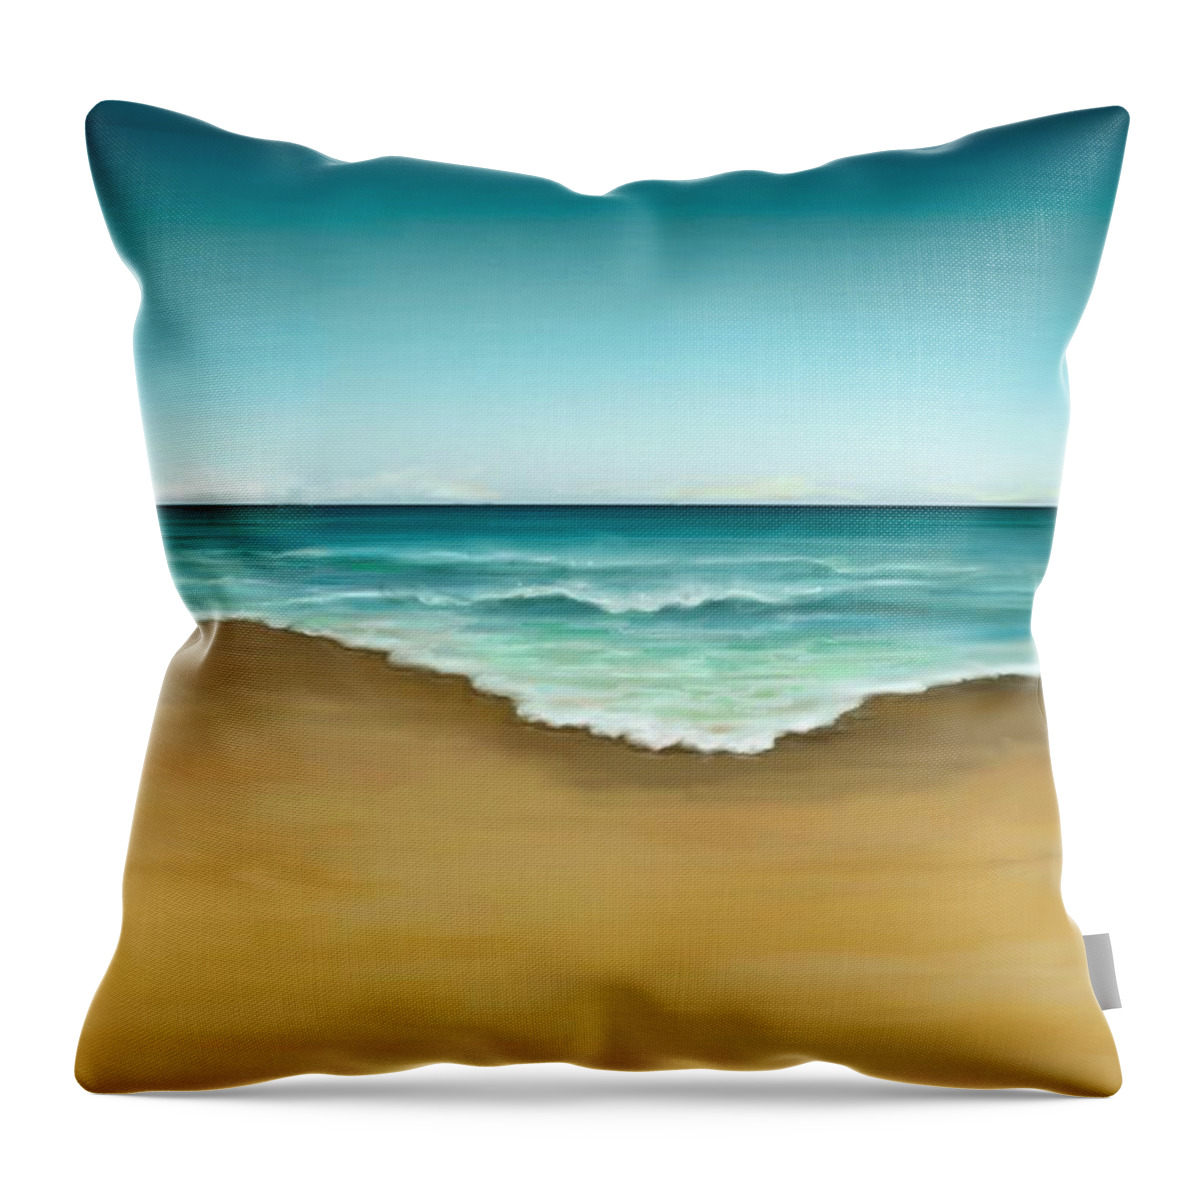 Abstract Throw Pillow featuring the painting Semi Abstract Beach by Stephen Jorgensen